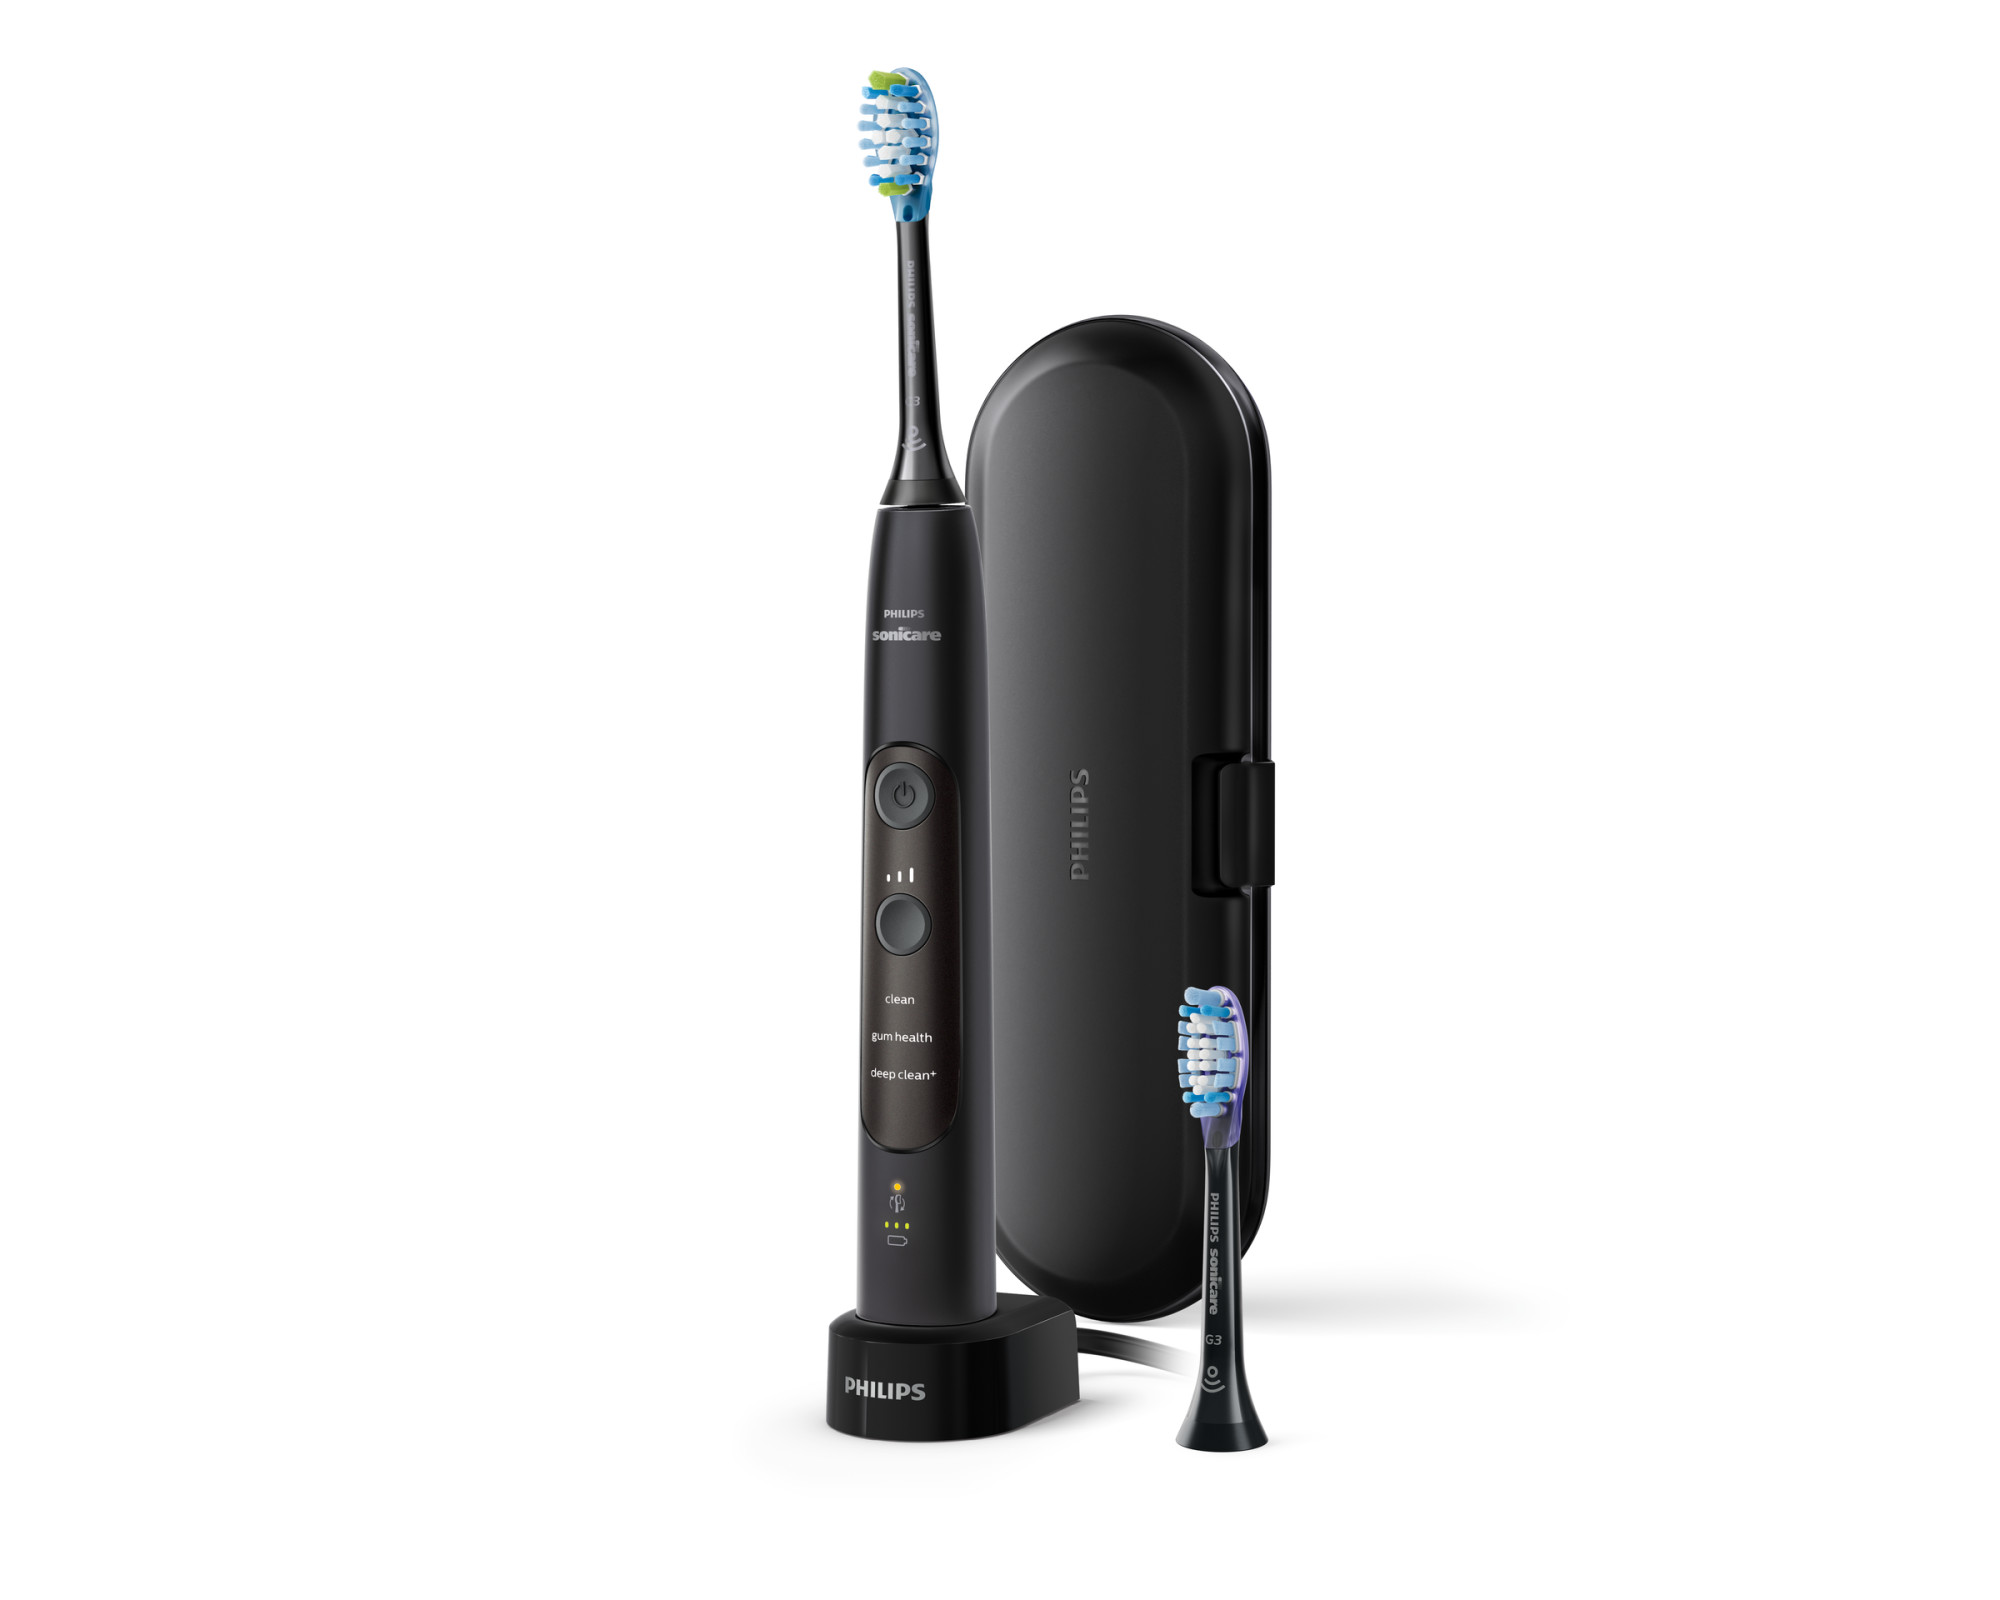 Philips Sonicare ExpertClean 7300, Rechargeable Electric Toothbrush, Black HX9610/17 - image 8 of 19